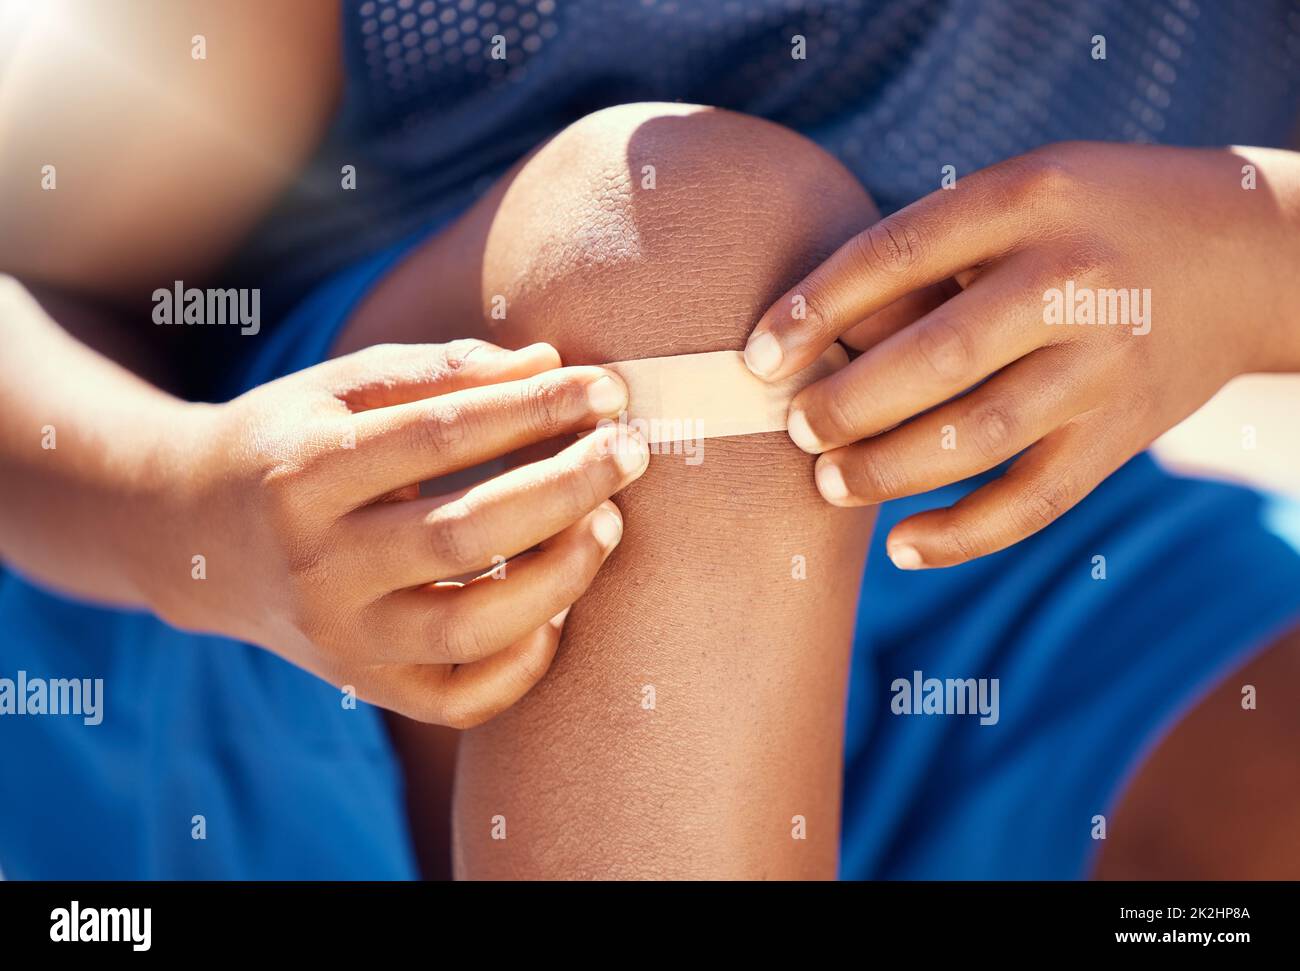 Children, accident and plaster with a band aid on the knee of boy with an injury, wound or pain. Kids, cut and heal with the hands of a male child Stock Photo